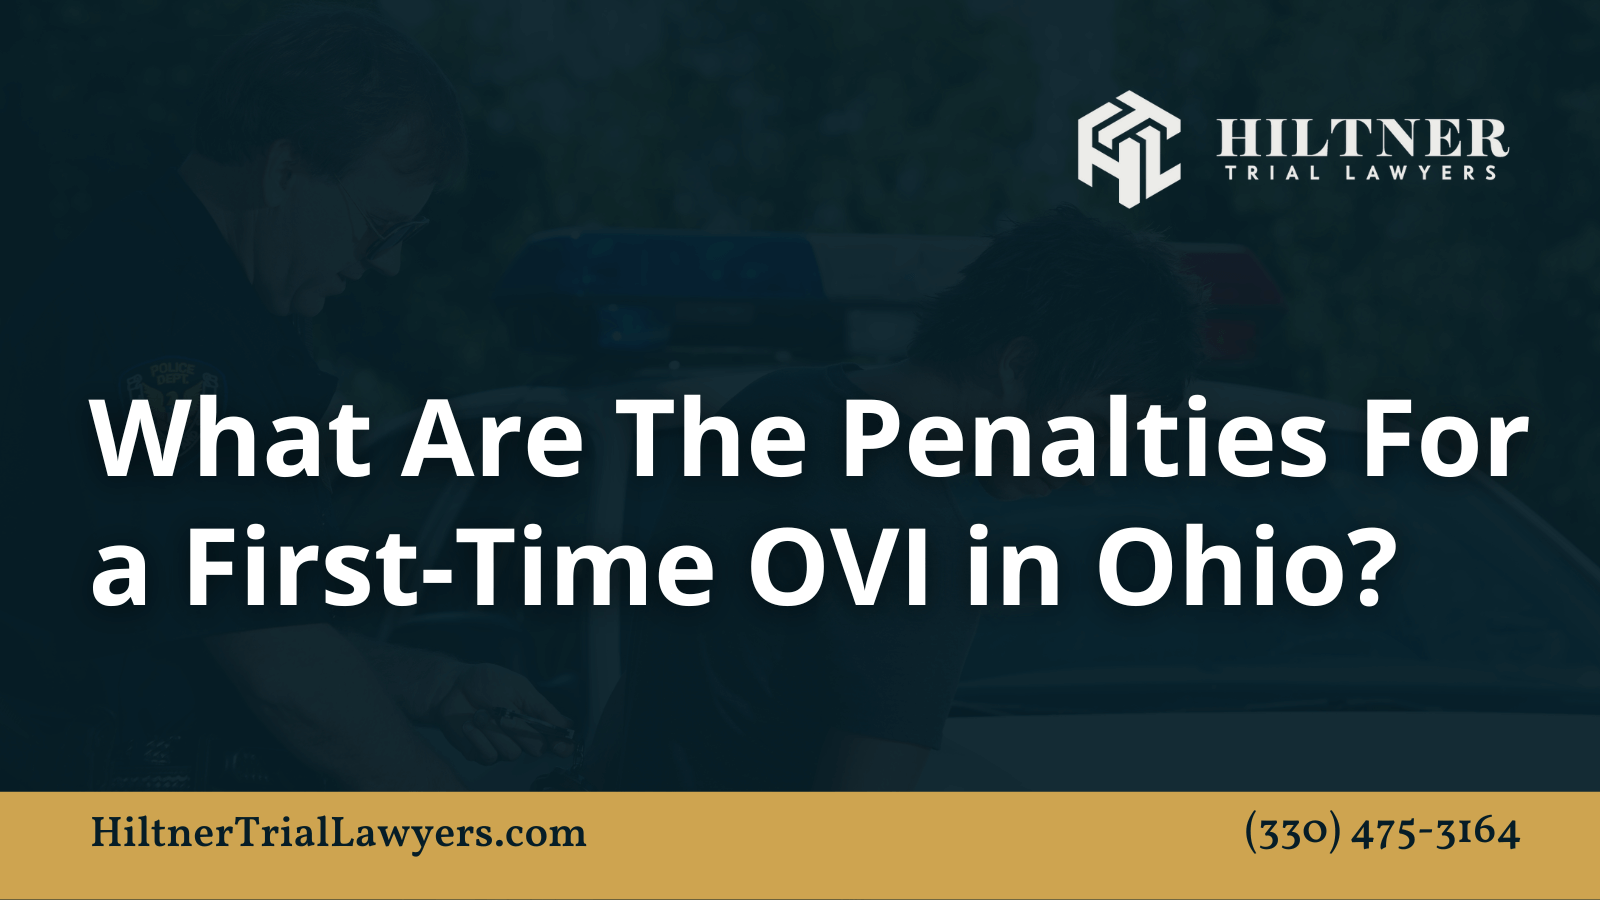 What Are The Penalties For a First-Time OVI in Ohio - Hiltner Trial Lawyers Ohio - max hiltner